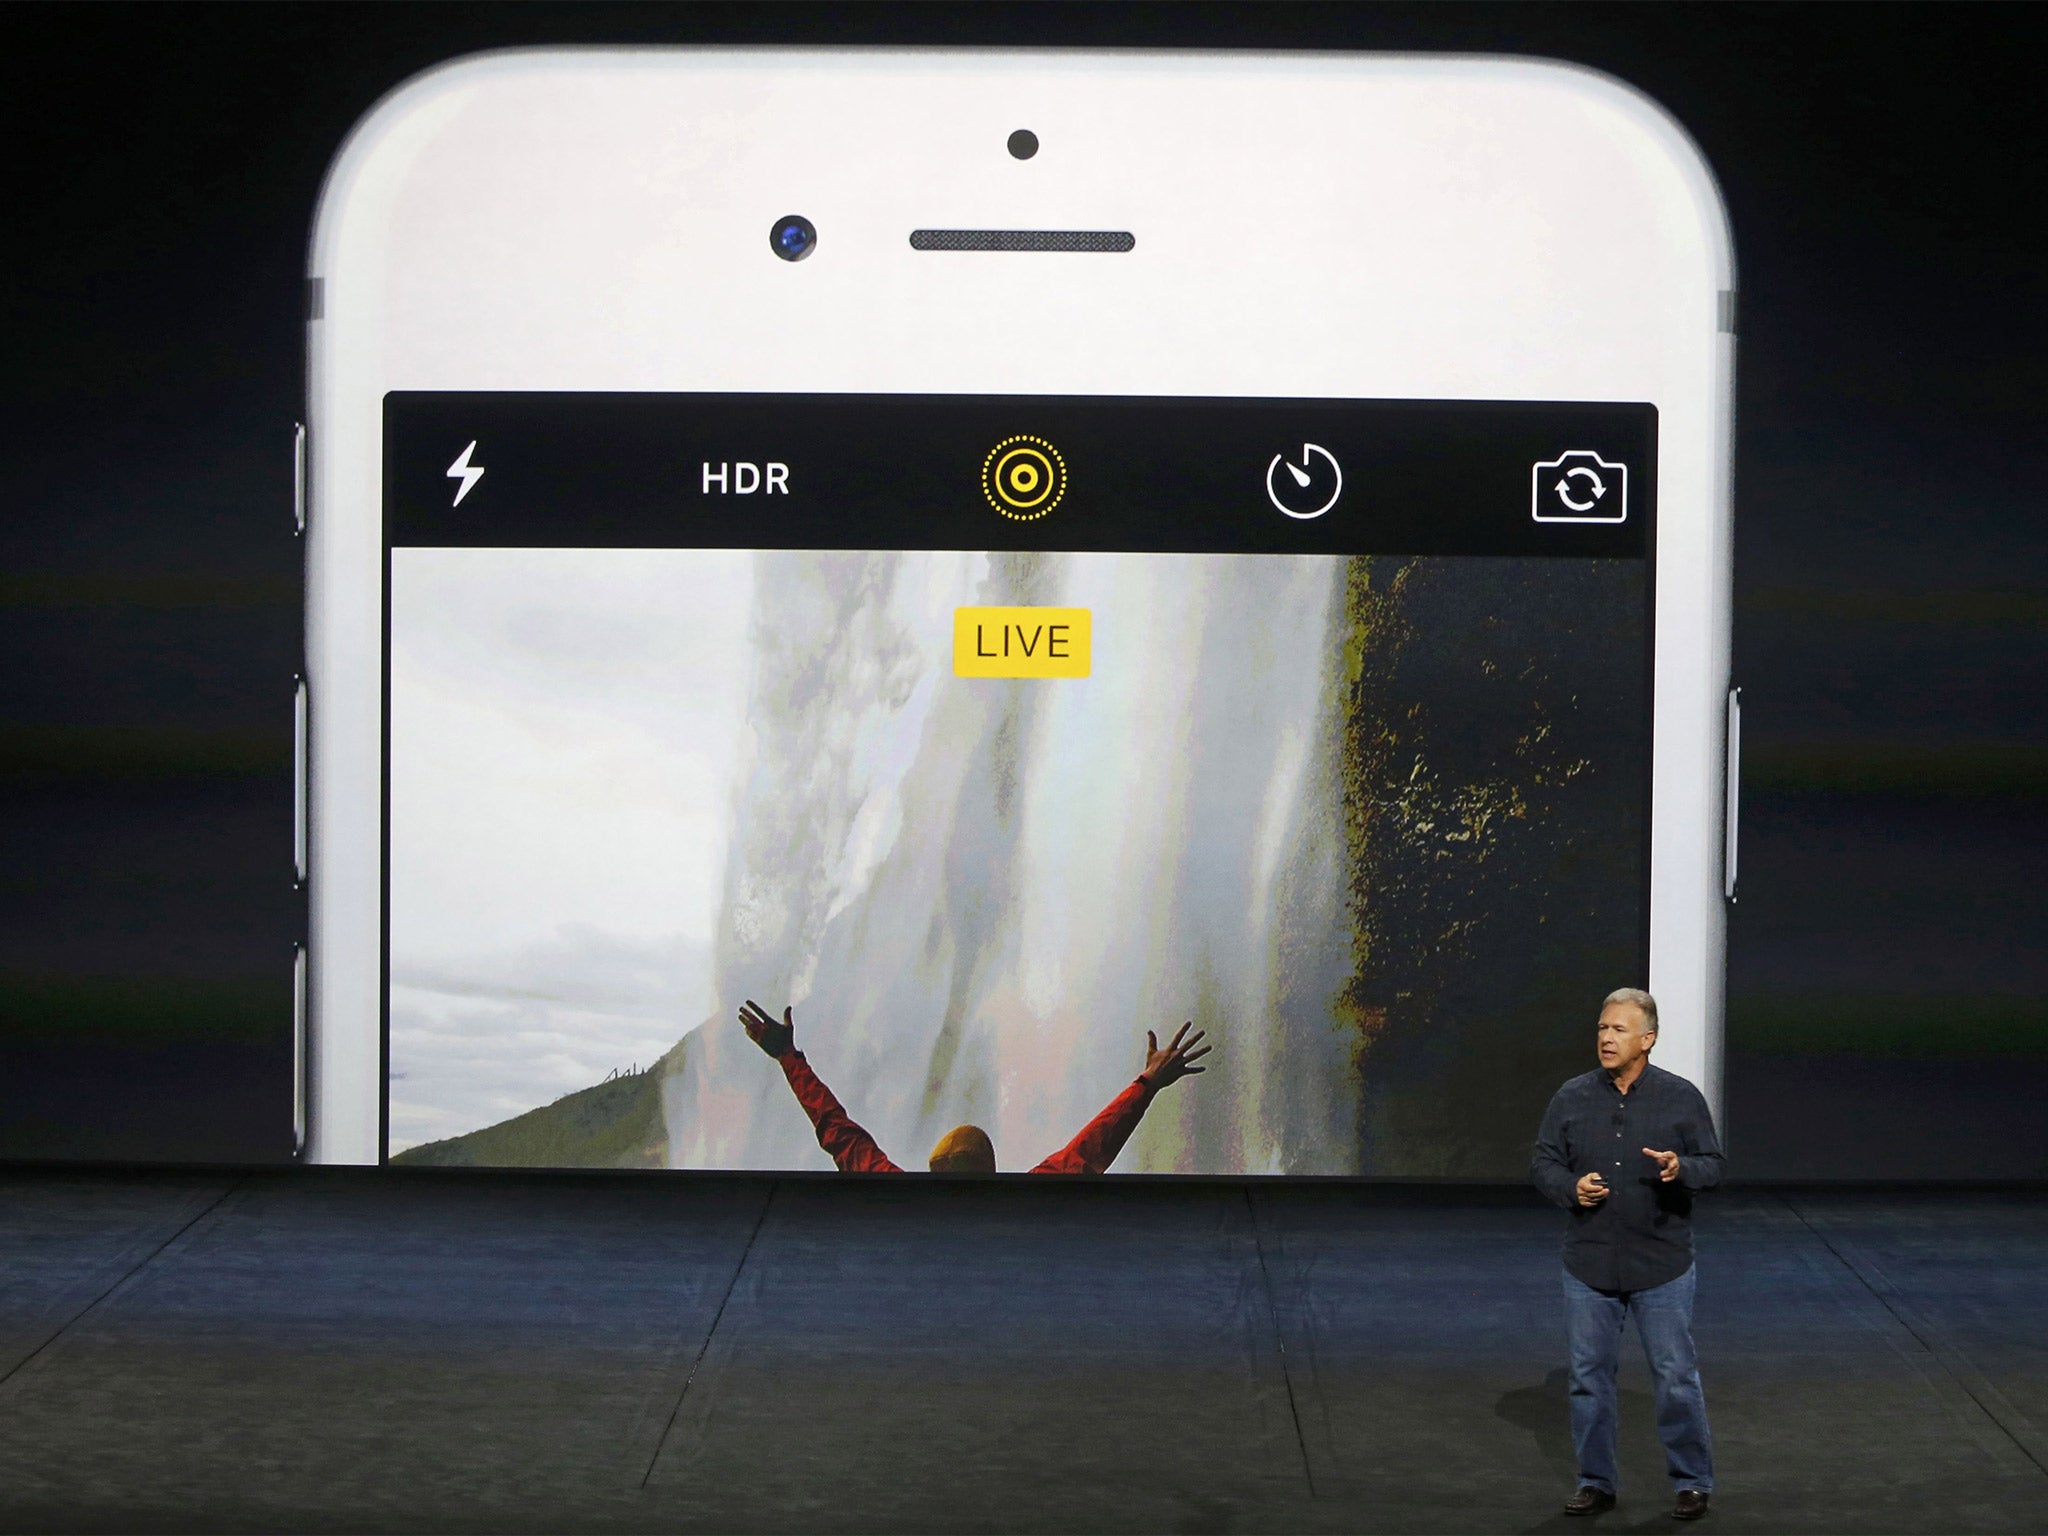 Phil Schiller, Senior Vice President of Worldwide Marketing at Apple Inc, speaks about the live photo capability for new iPhone 6s and iPhone 6s Plus